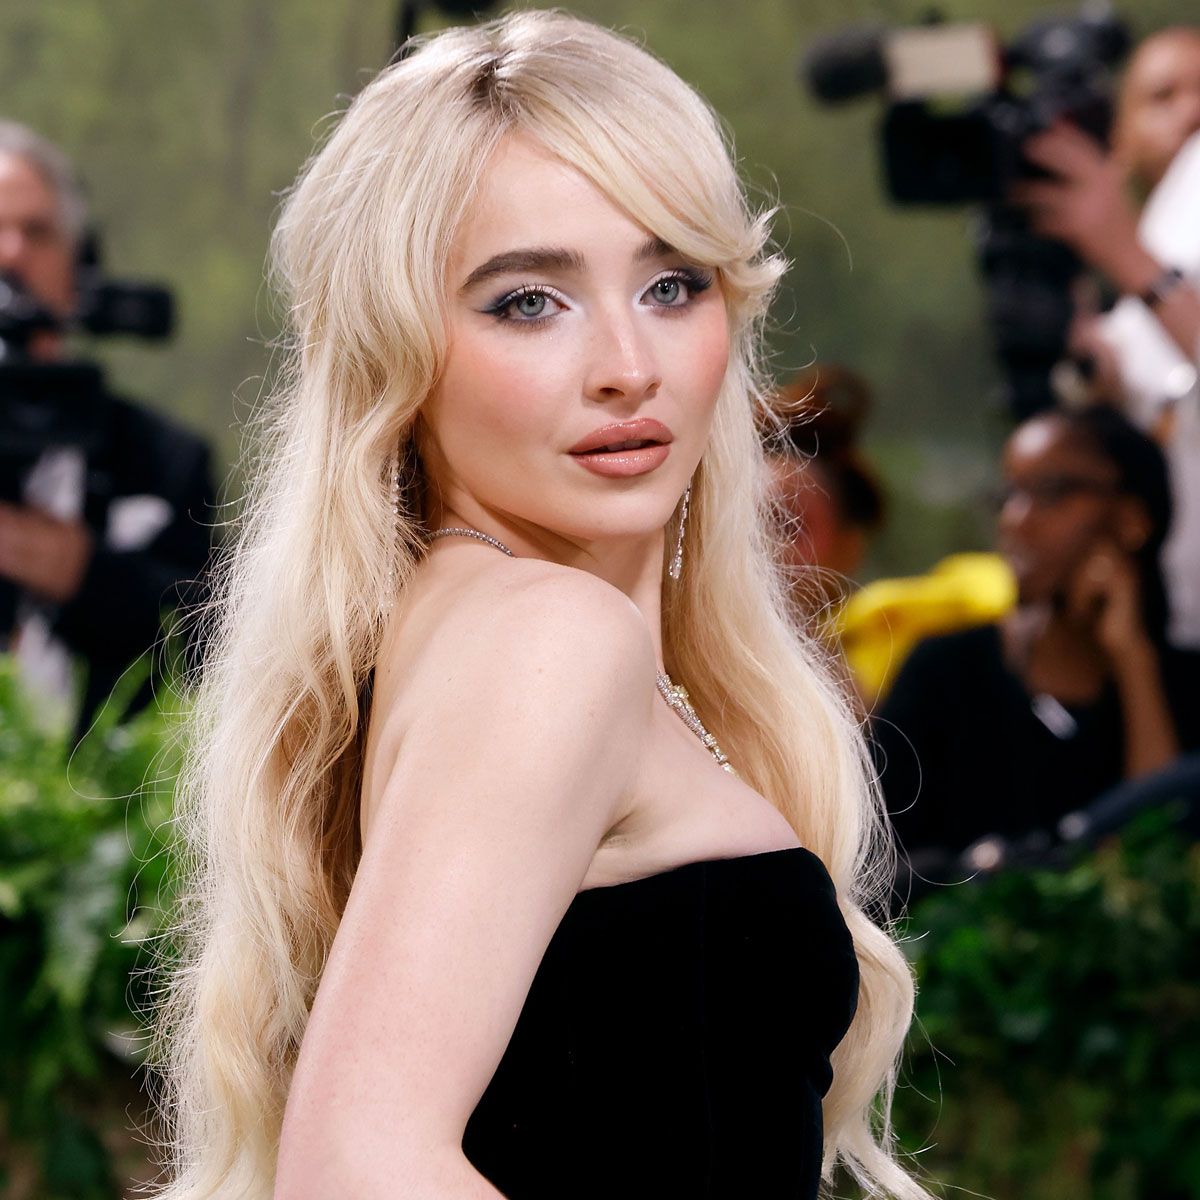 Sabrina Carpenter Just Re-Created an Iconic 2000s Rom-Com Look